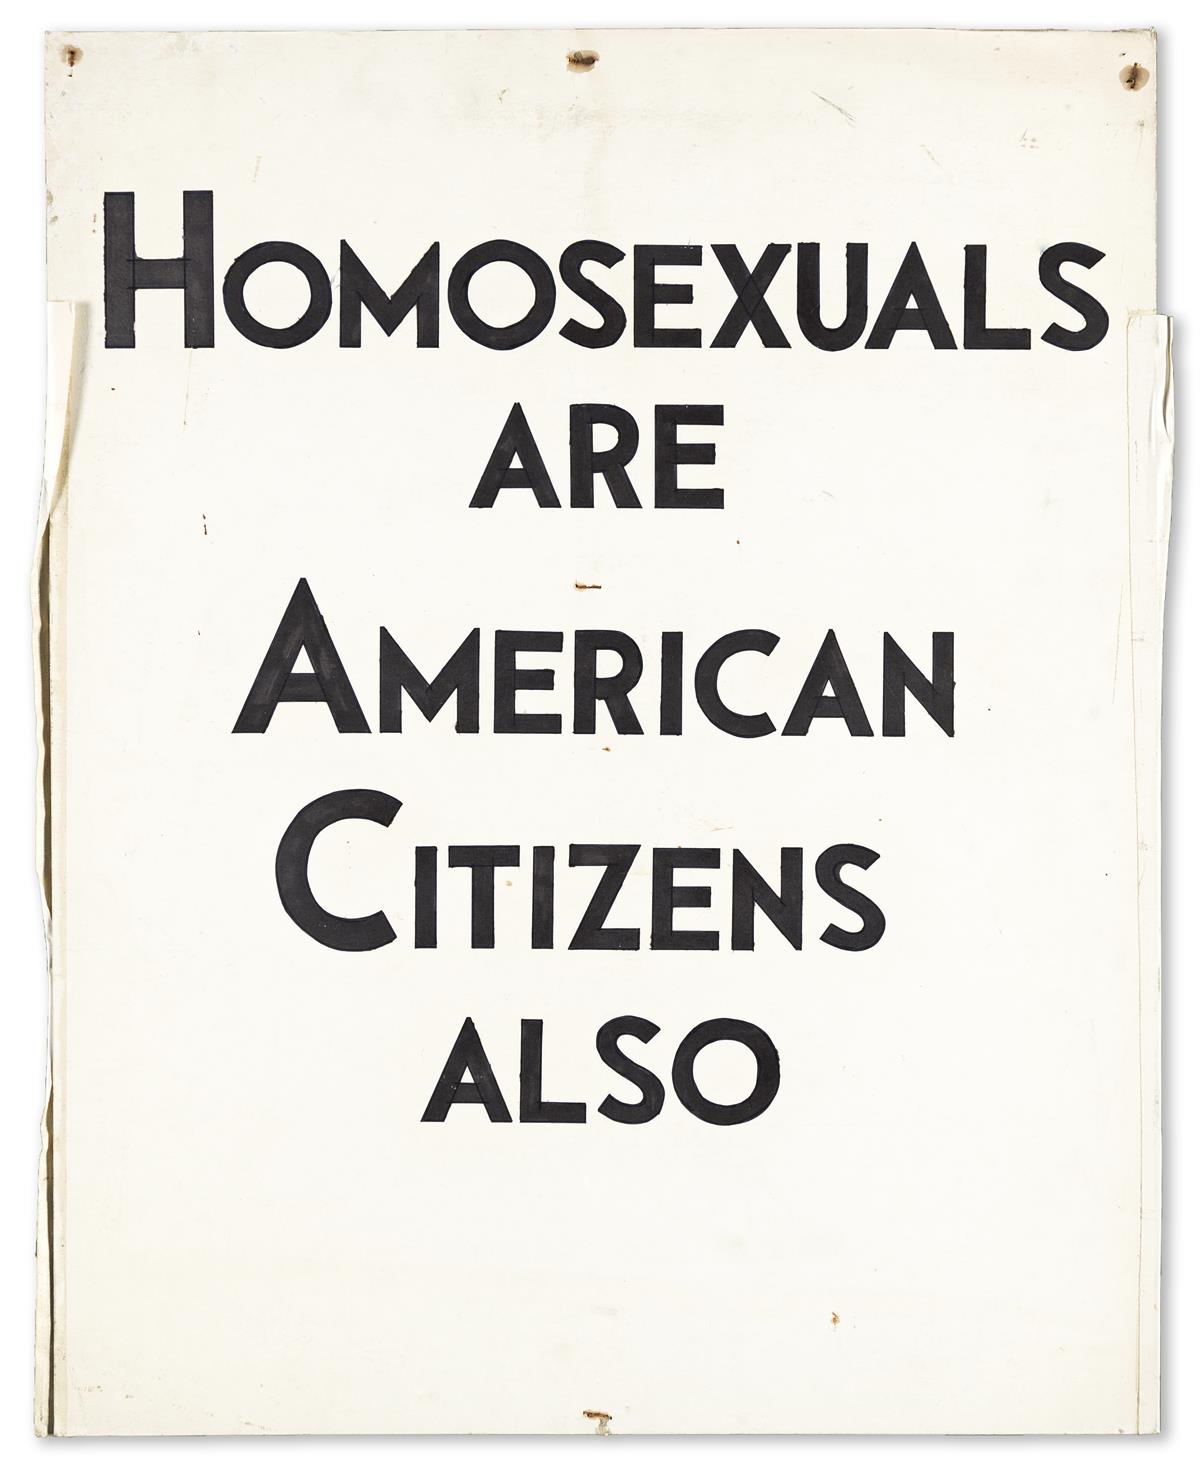 "Homosexuals are American Citizens Too" sign from Philadelphia's Annual Reminder march.